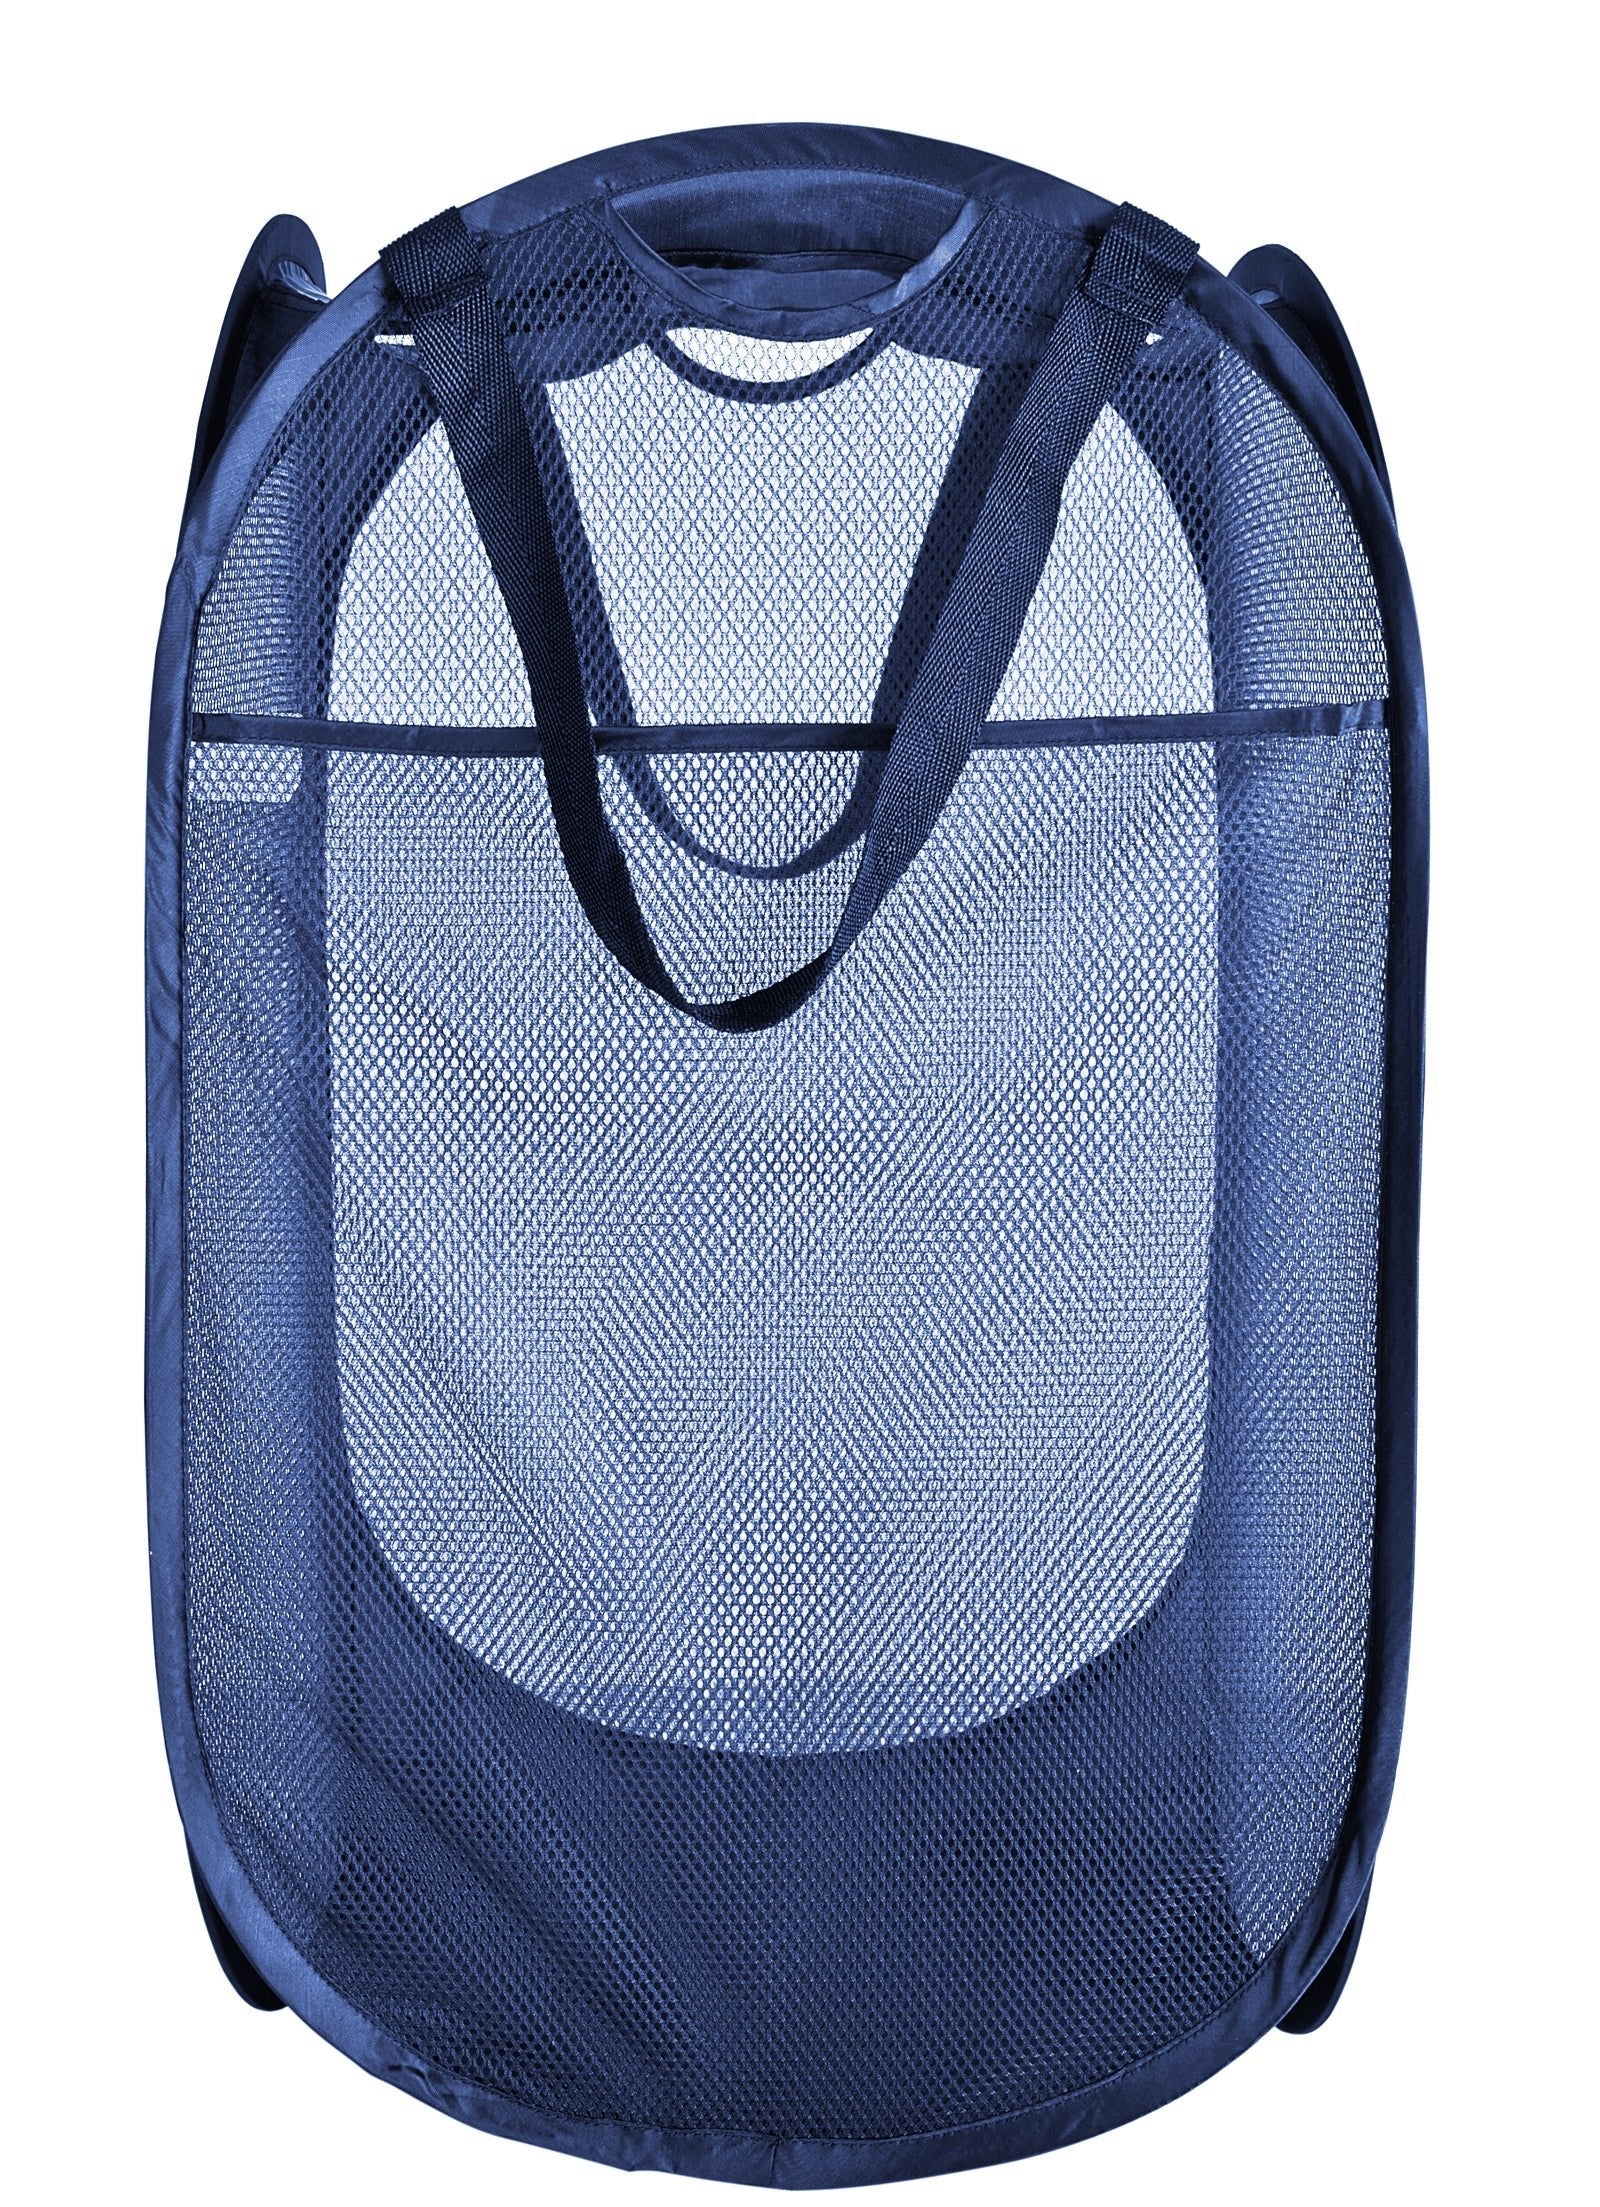 Deluxe Mesh Pop Up Square Laundry Hamper with Side Pocket and Handles - VentilAir Fabric Collapsible Design - Smart Design 7